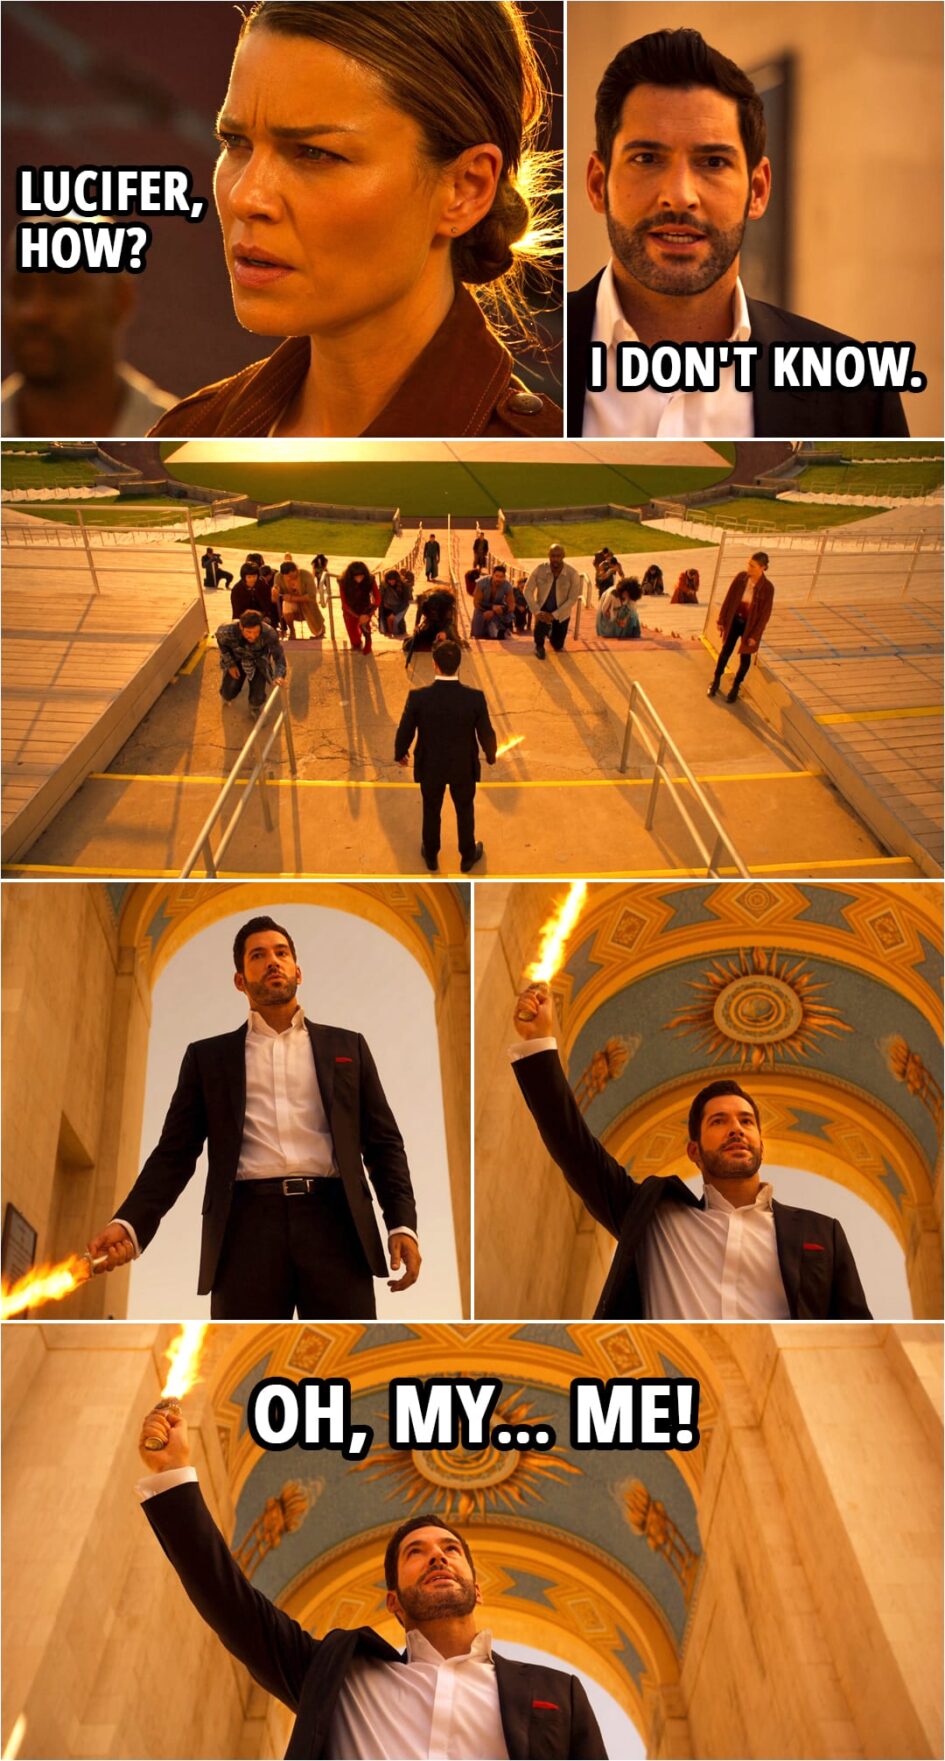 Quote from Lucifer 5x16 | Lucifer Morningstar: Bend the knee, brother. To the death, right? (Michael kneels down and Lucifer cuts off Michael's wings...) Lucifer Morningstar: No more killing. In my time here on Earth, I've learned everyone deserves a second chance. Even me. Even you, Michael. Chloe Decker: Lucifer, how? Lucifer Morningstar: I don't know. I... Oh, my me!